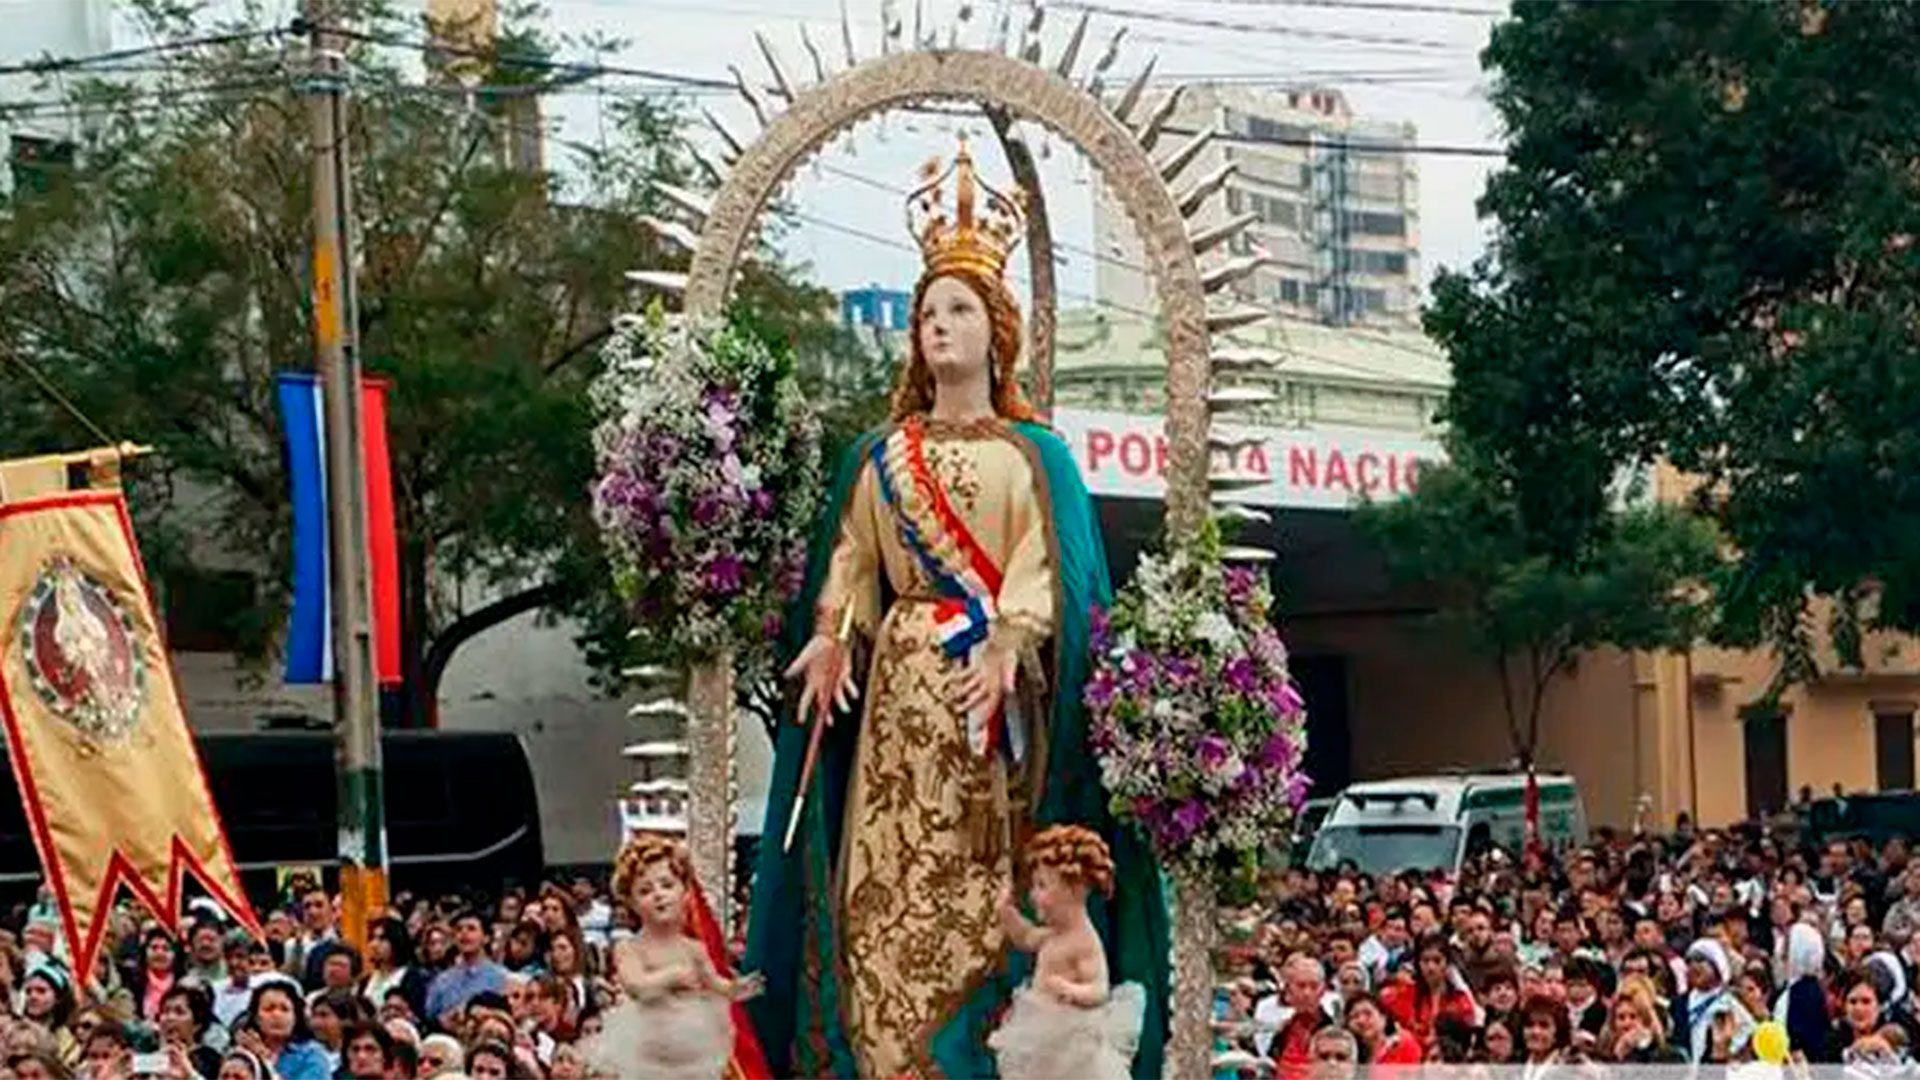 The celebration of the Assumption of the Virgin Mary in Asuncion del Paraguay, a city founded on August 15, 1537, bears this name in honor of the creed.